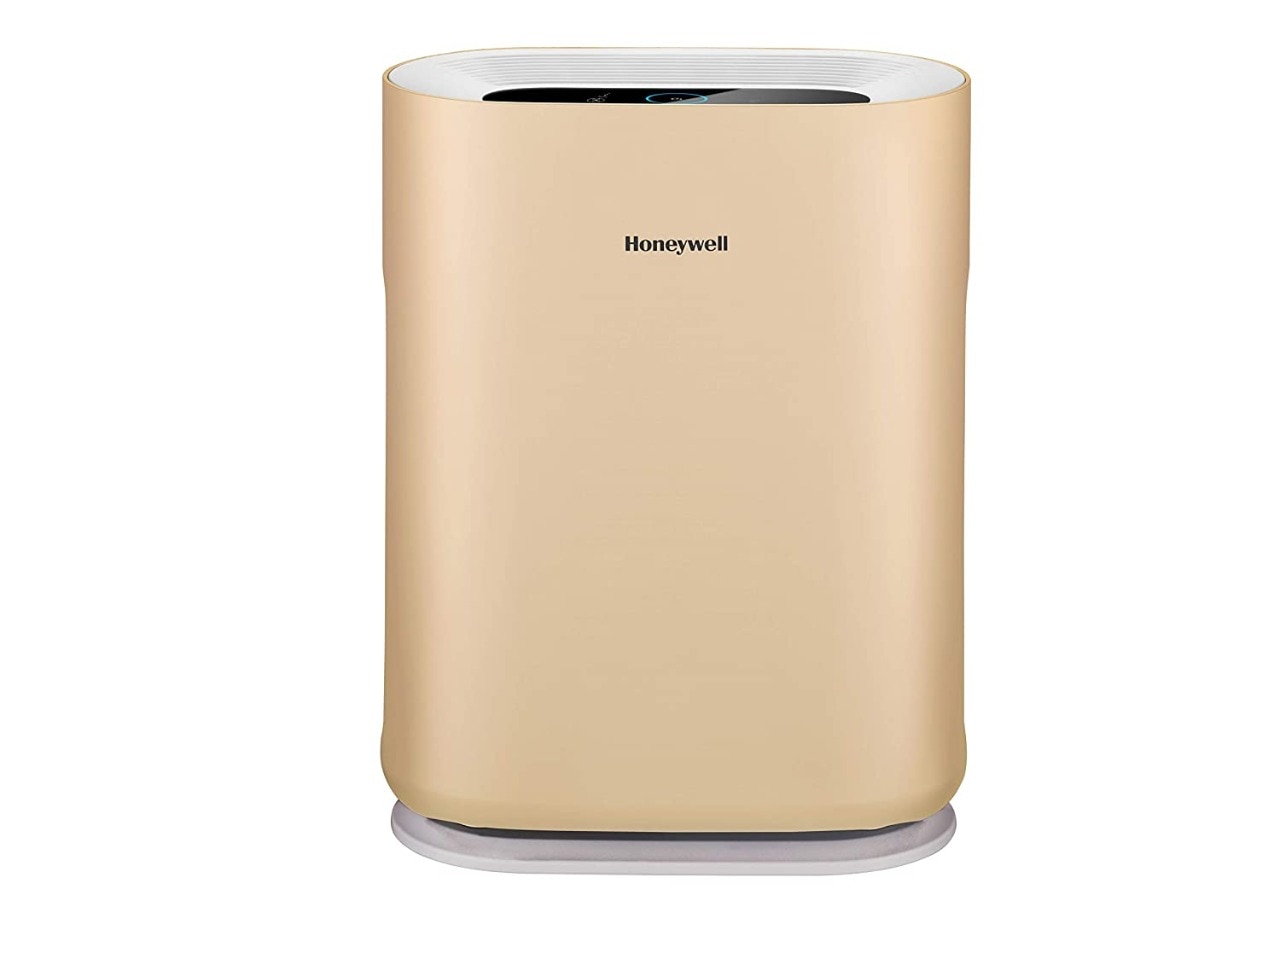 Amazon Festival Sale: Take care of your health this Diwali, buy air purifier for less than 10 thousand to keep the house virus and bacteria free